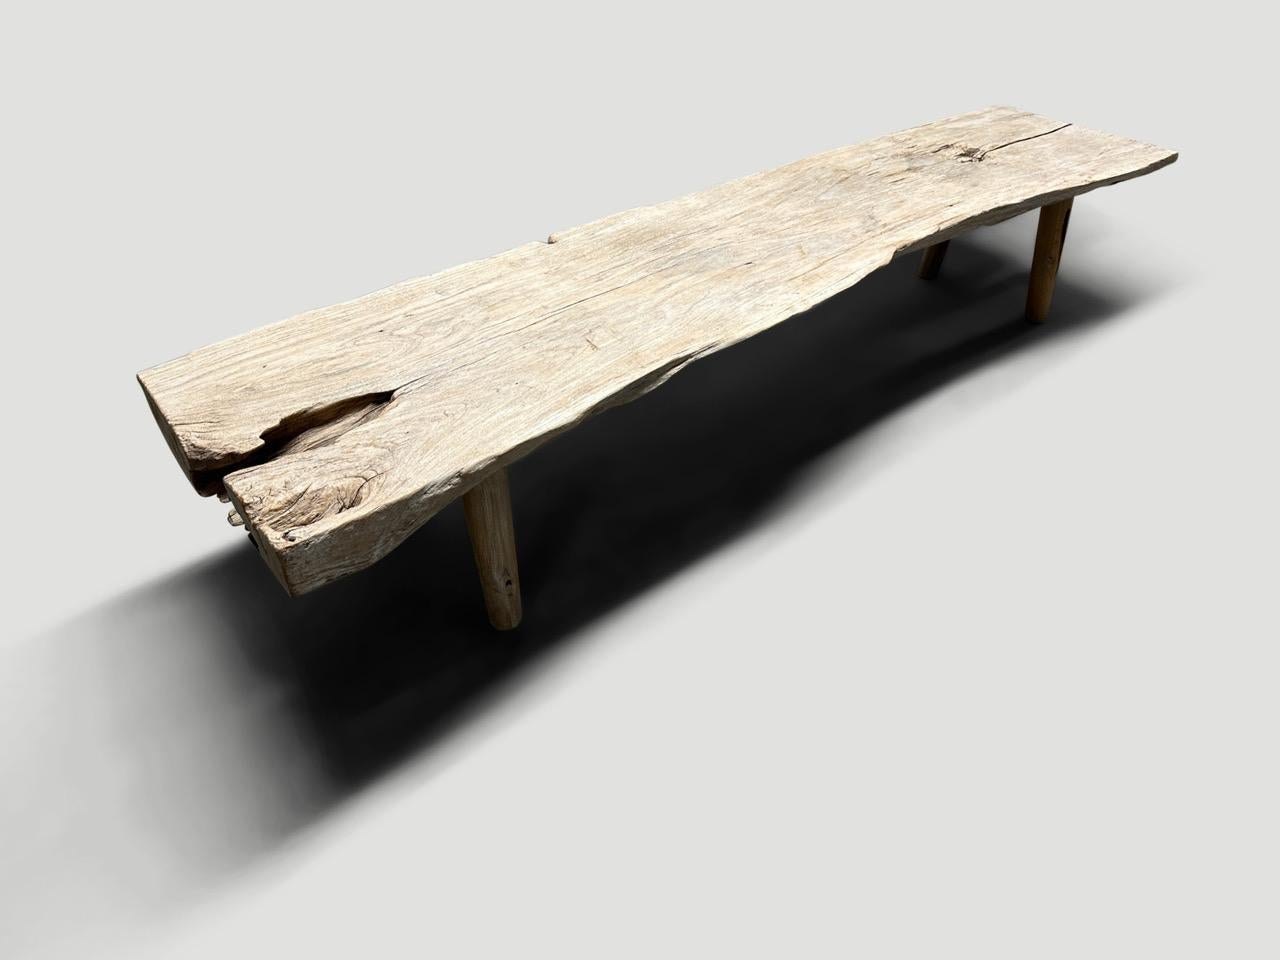 Impressive, live edge two inch thick teak wood bench in pale wood tones, resembling stone. Beautiful details in this 100 year old wood. We added minimalist cylinder legs. Both usable and a piece of art. Rare. Full dimensions; 80